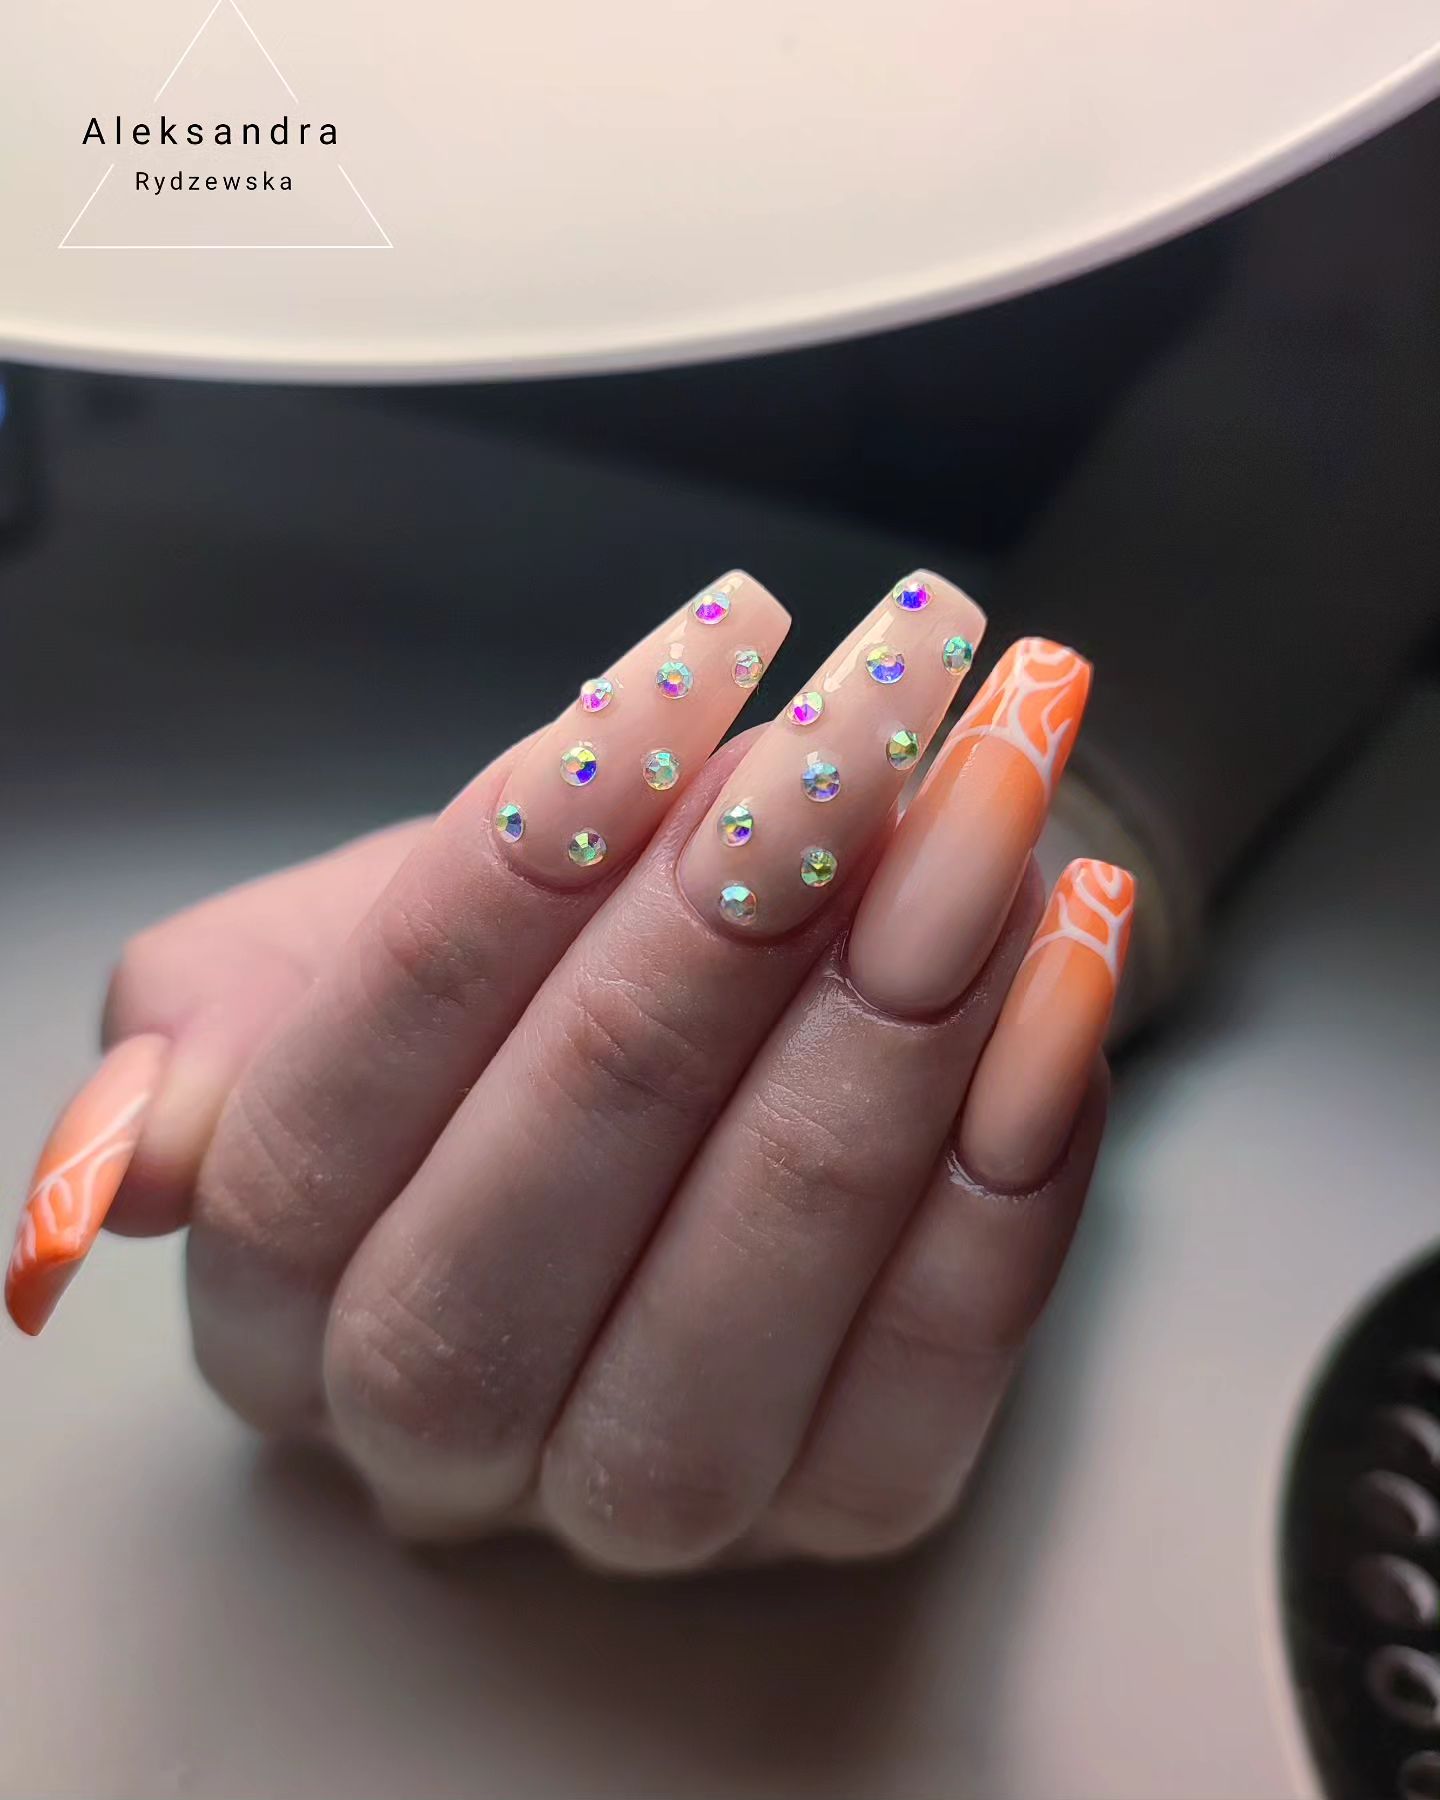 Subtle music-inspired nails perfect for festivals and gigs - BEFFSHUFF